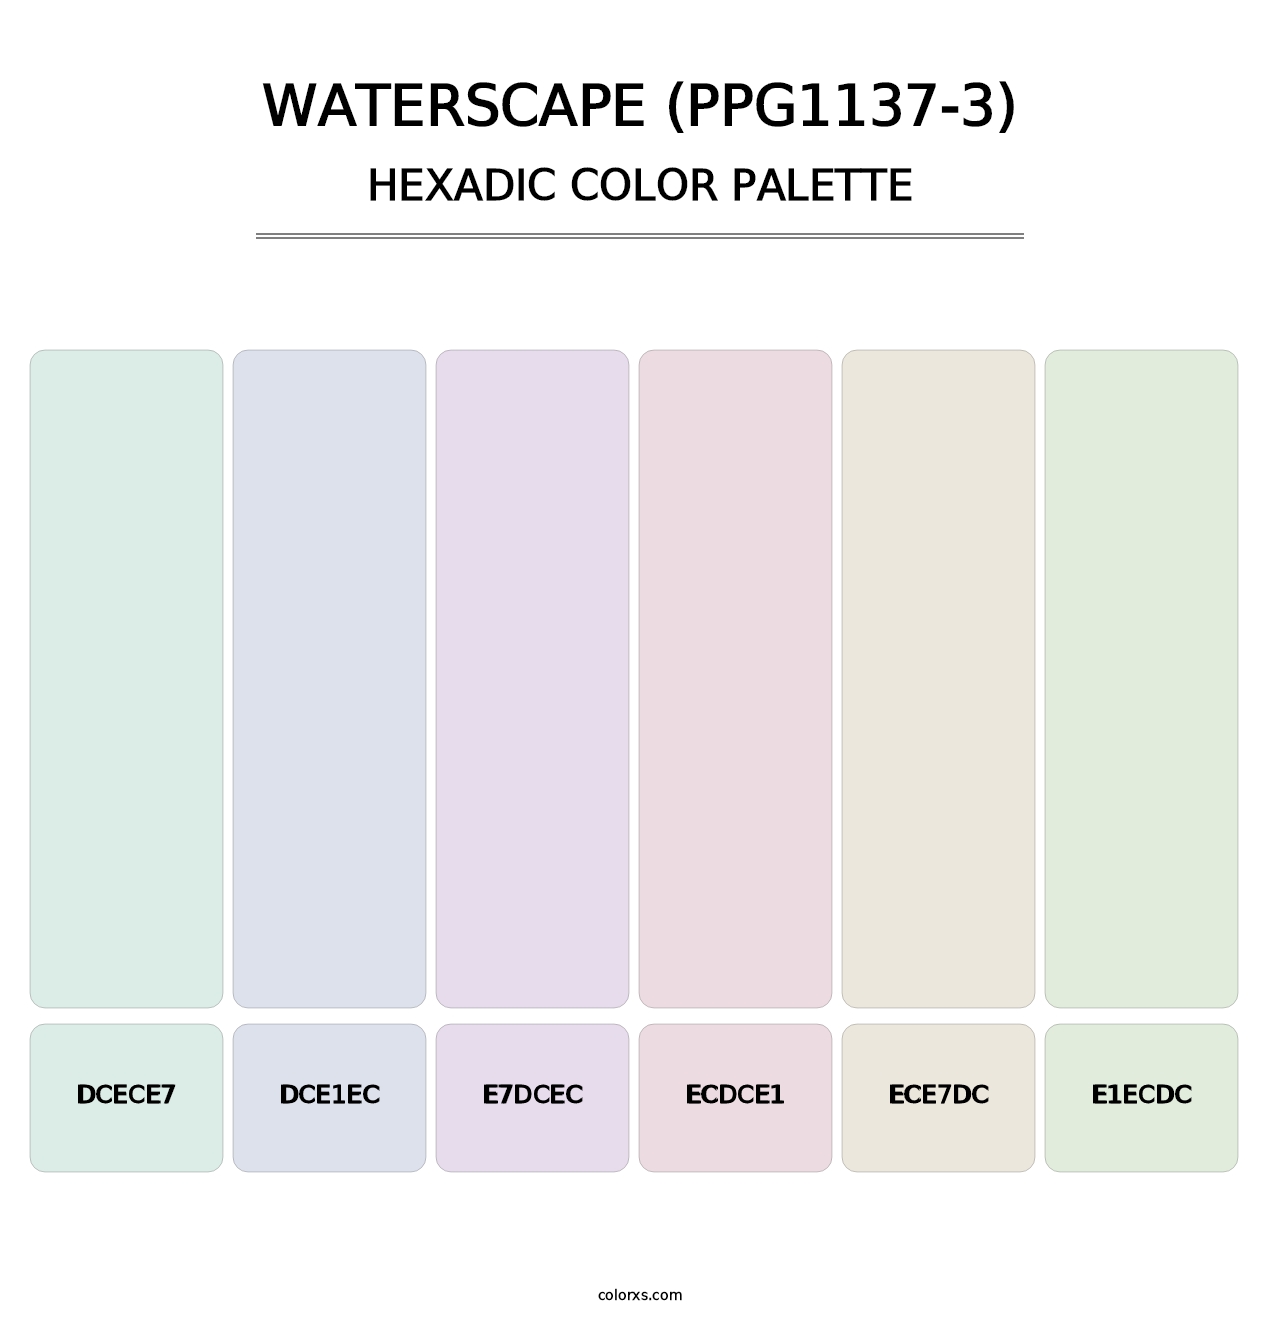 Waterscape (PPG1137-3) - Hexadic Color Palette